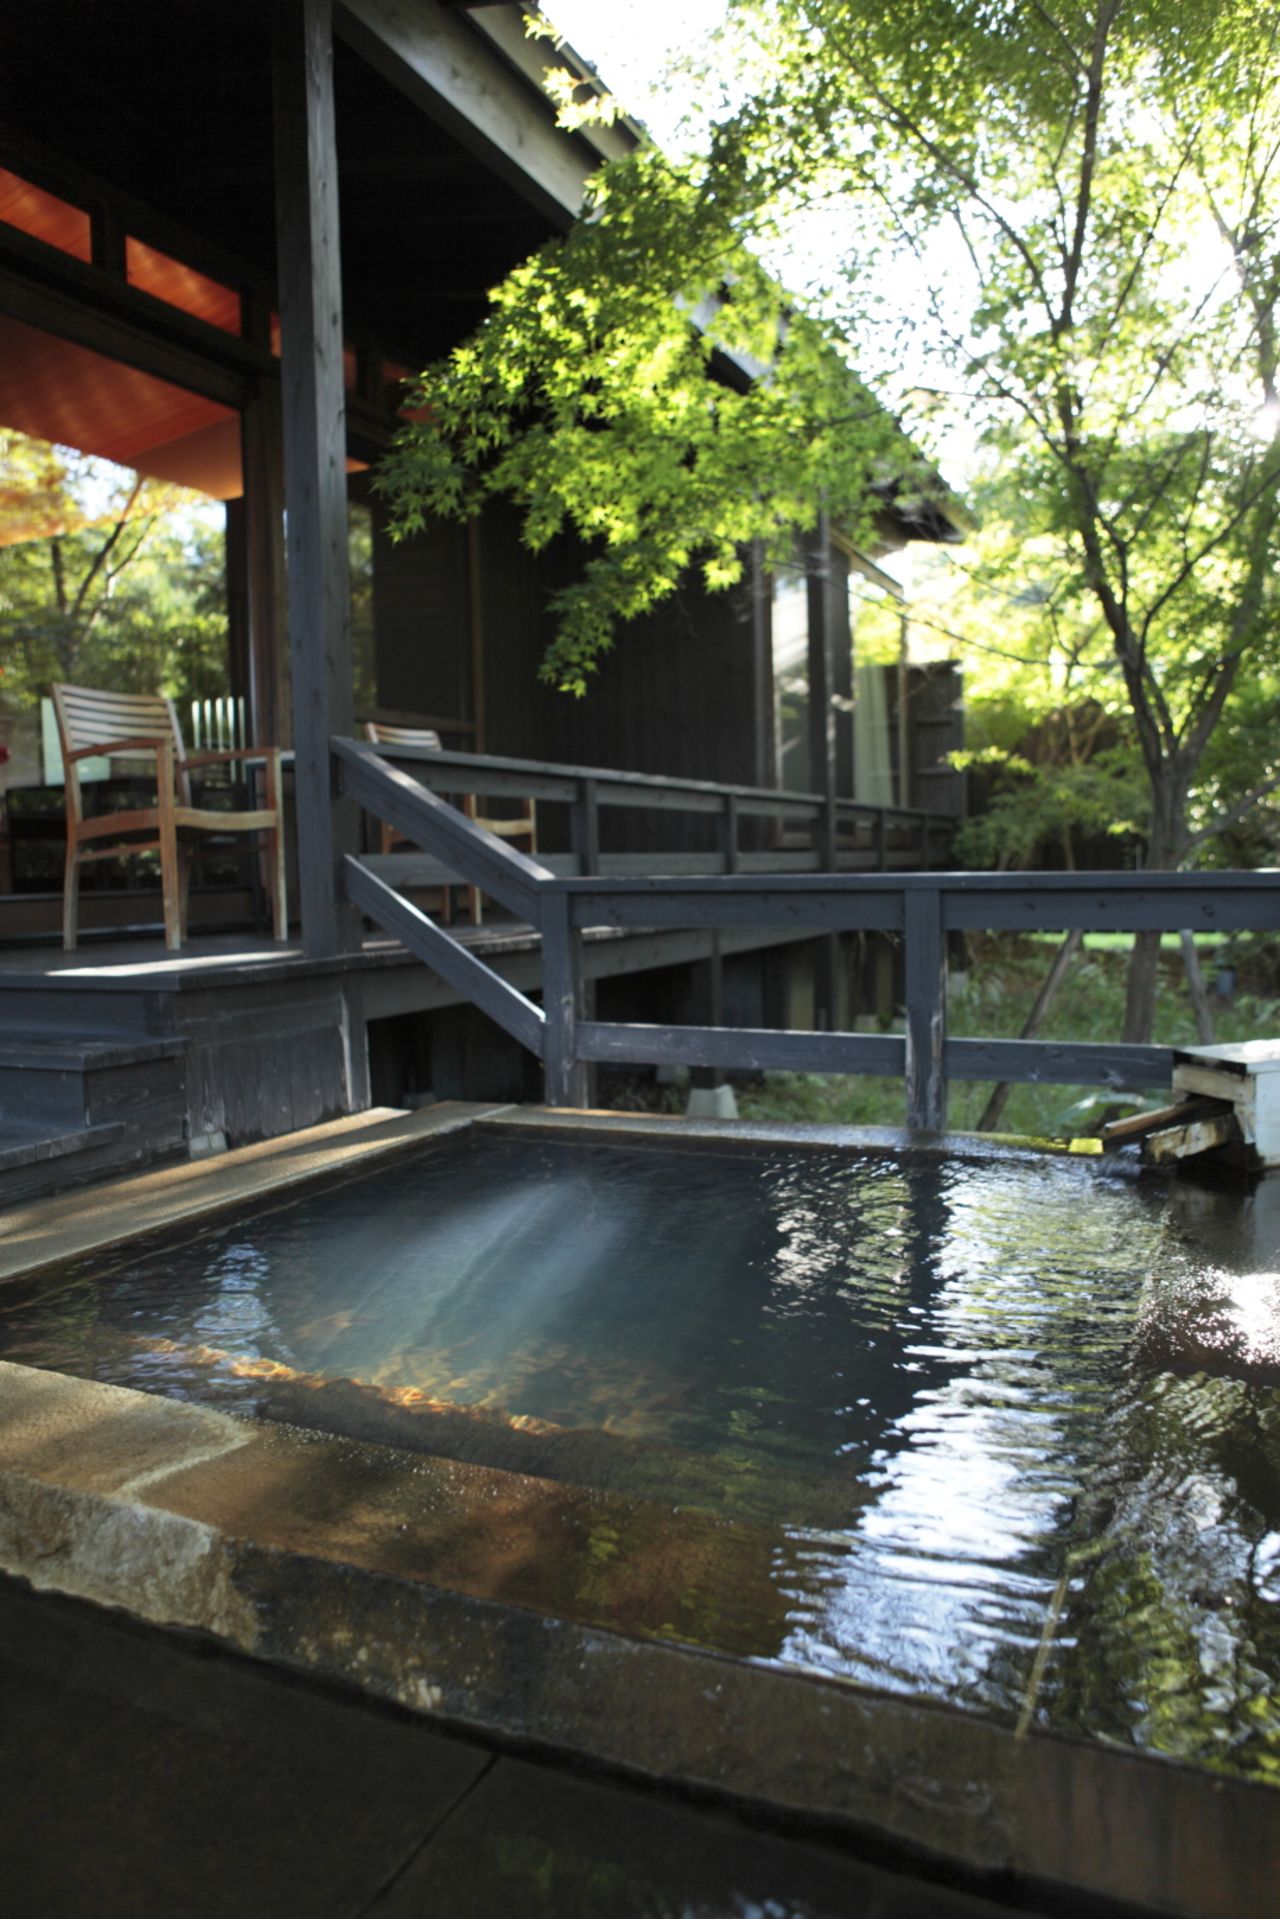 Bathing in hot spring water is an essential part of staying at a Japanese inn, and Hoshino Resorts KAI Aso makes it spectacular. Every villa on the six-and-a-half-acre property has a private outdoor tub on a terrace jutting into the surrounding forest.